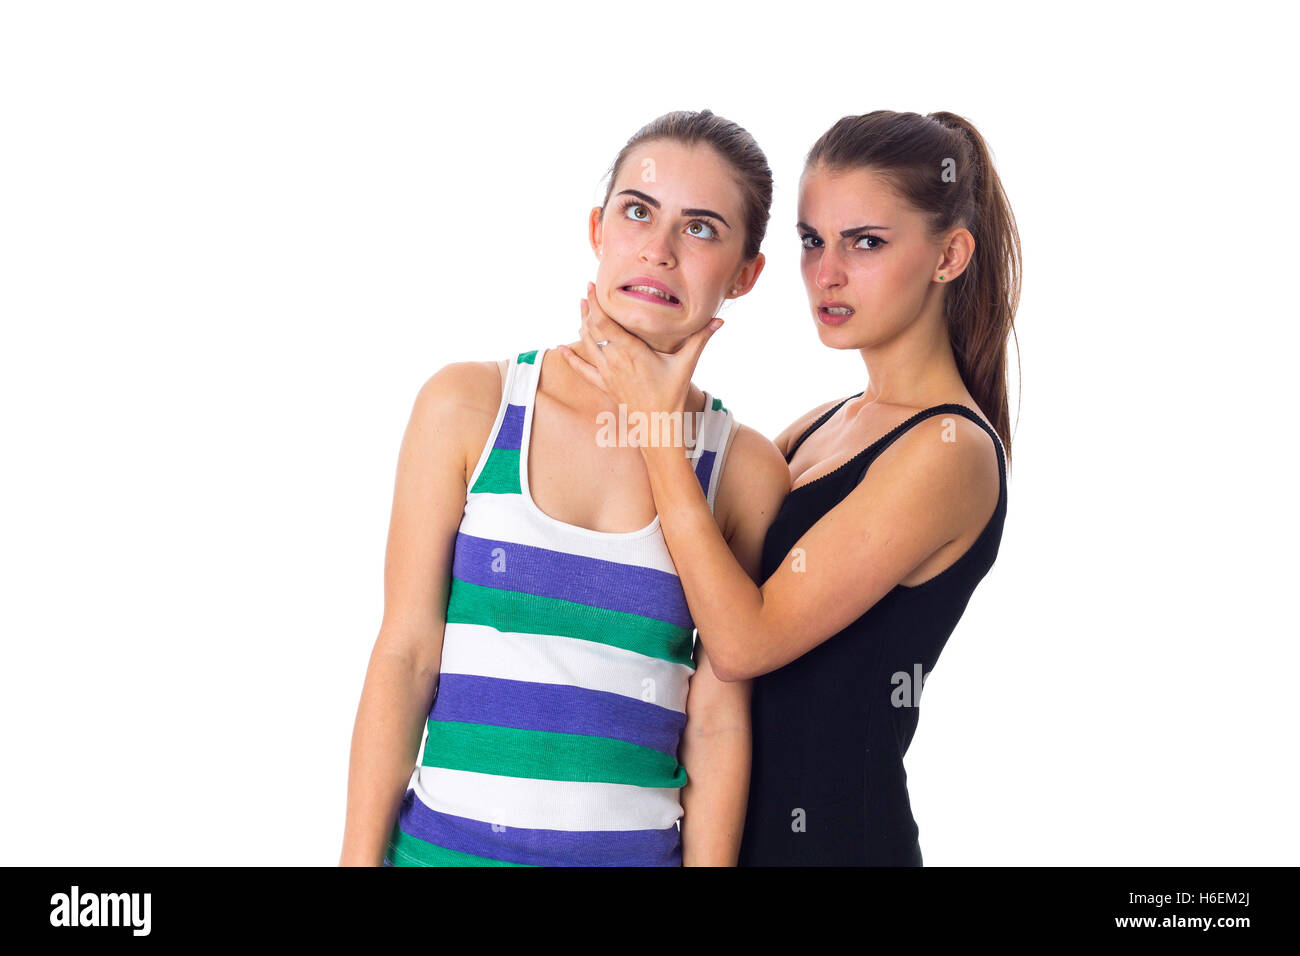 Young woman keeping another woman's throat Stock Photo